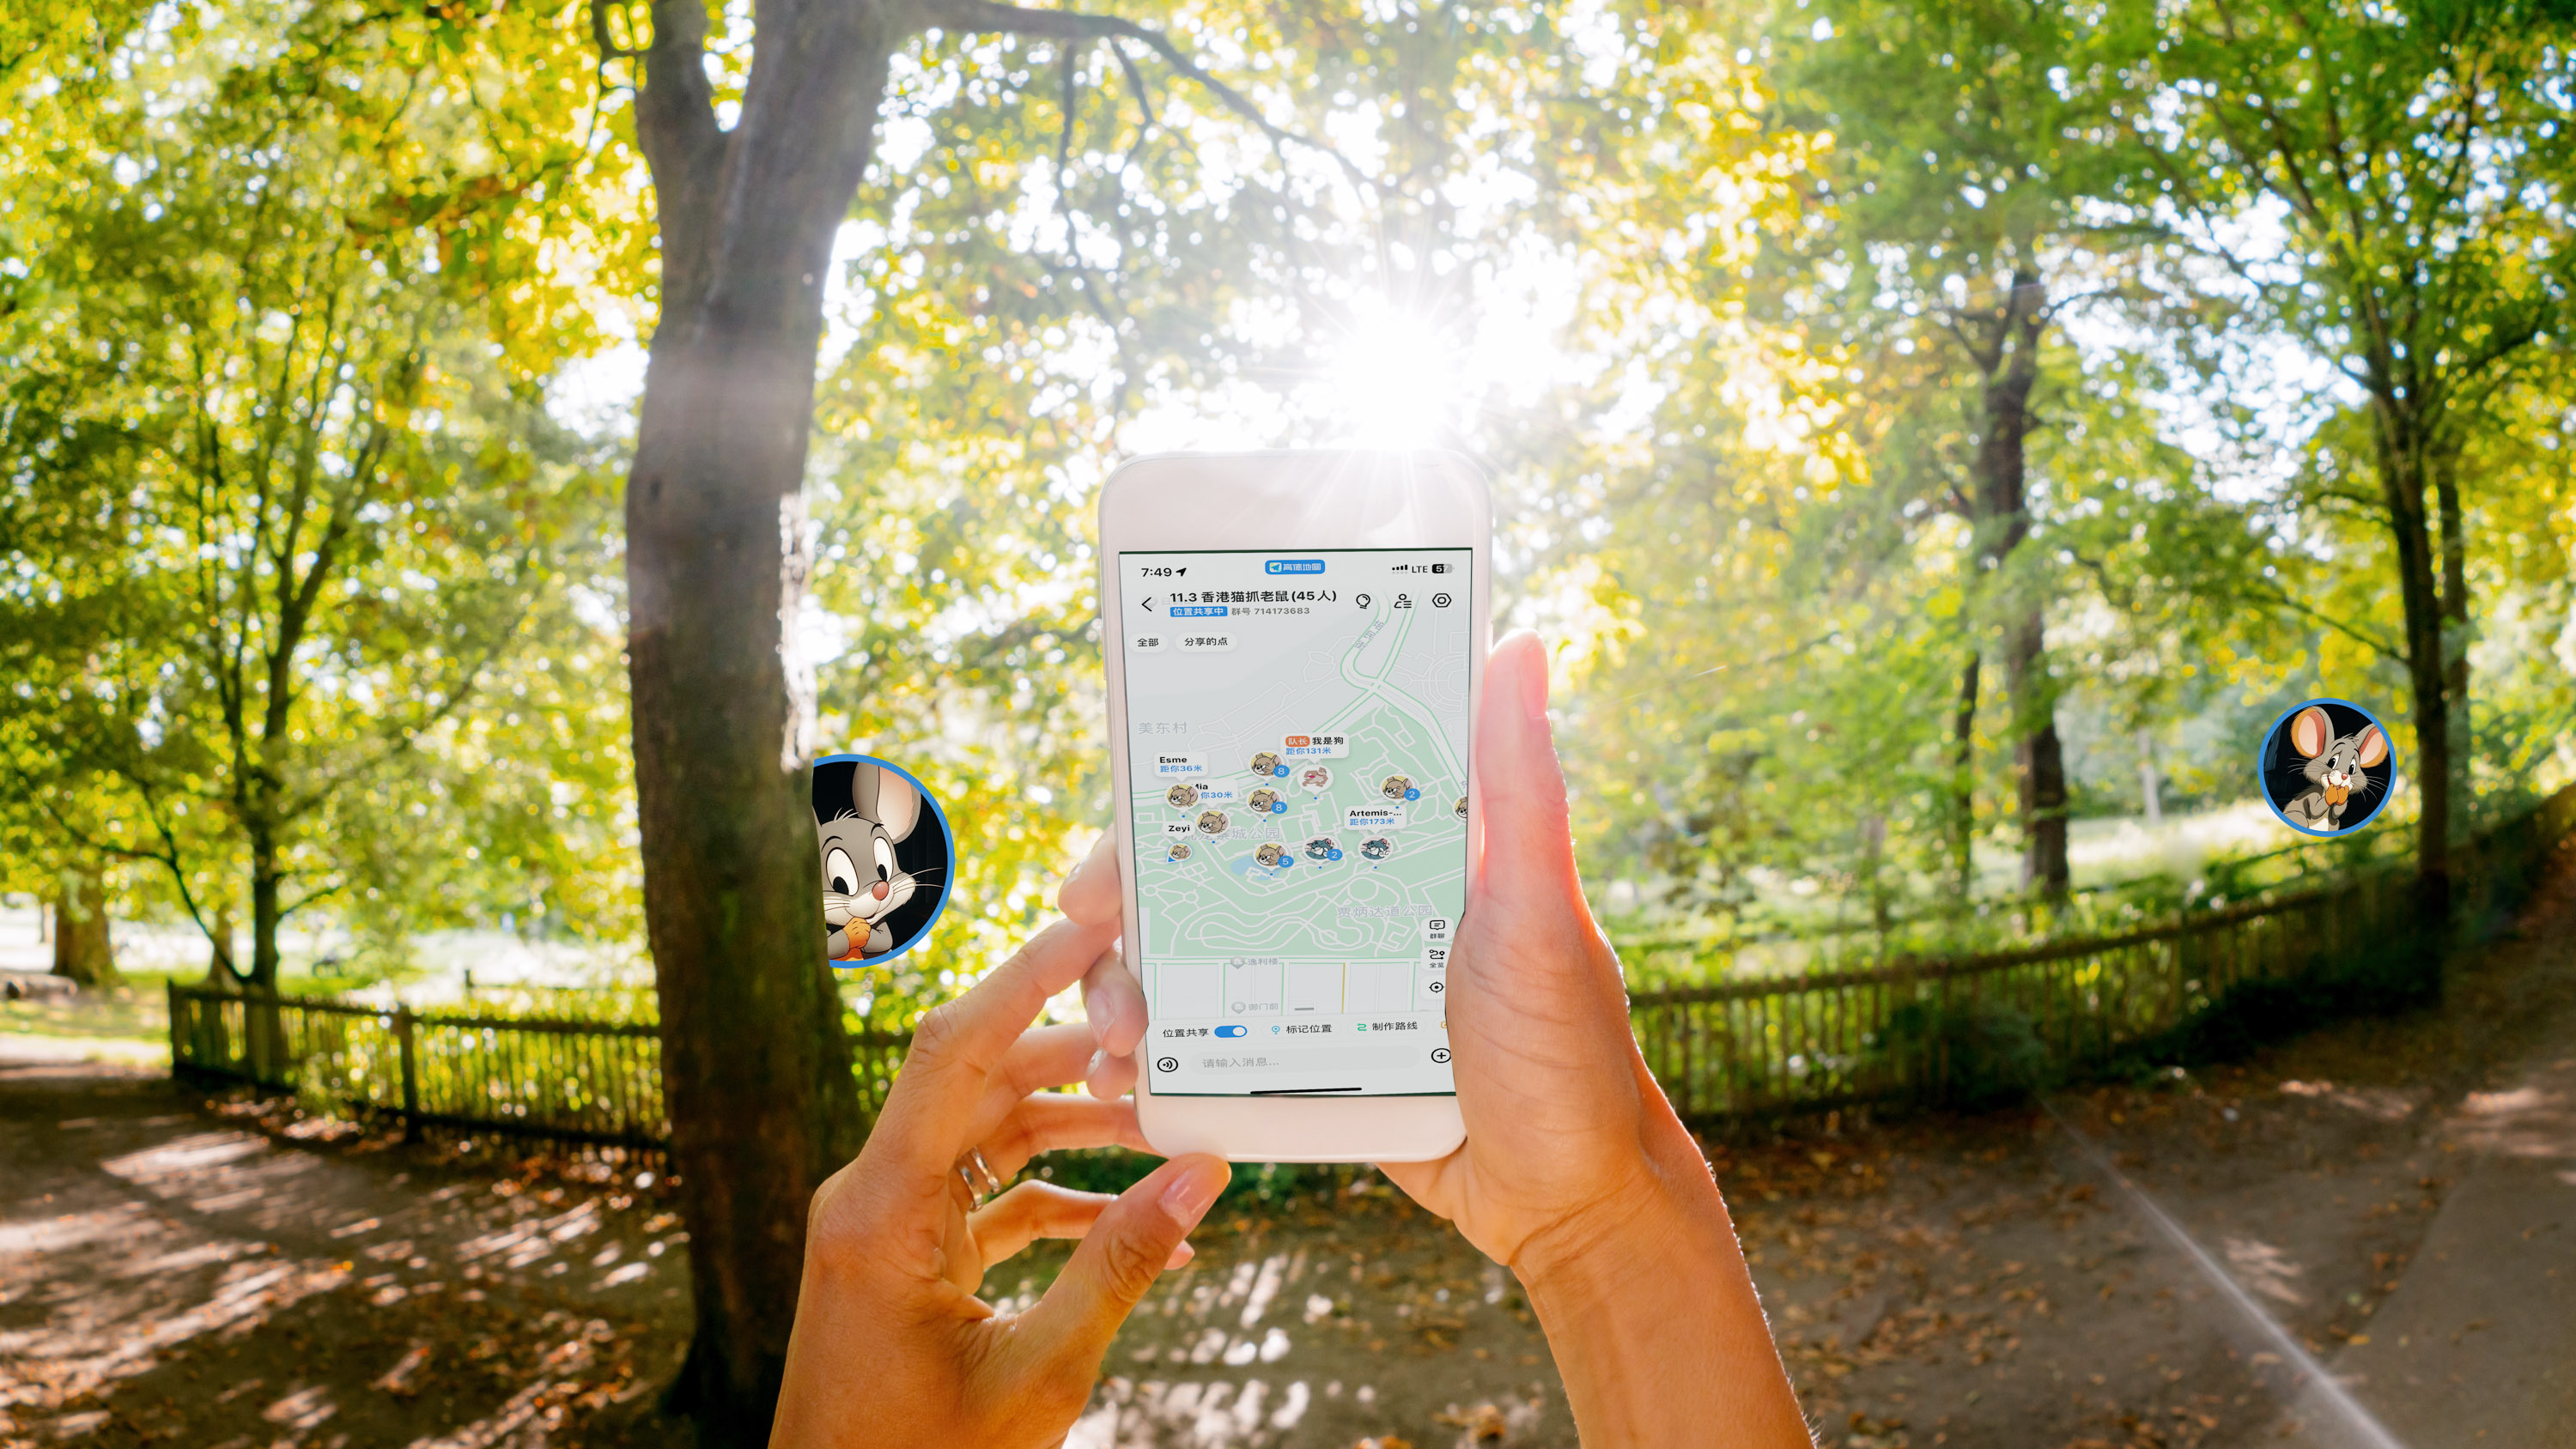 hands holding a cell phone with a map screen in a sunlit park. cartoon mouse icons are dropped into the landscape between the trees